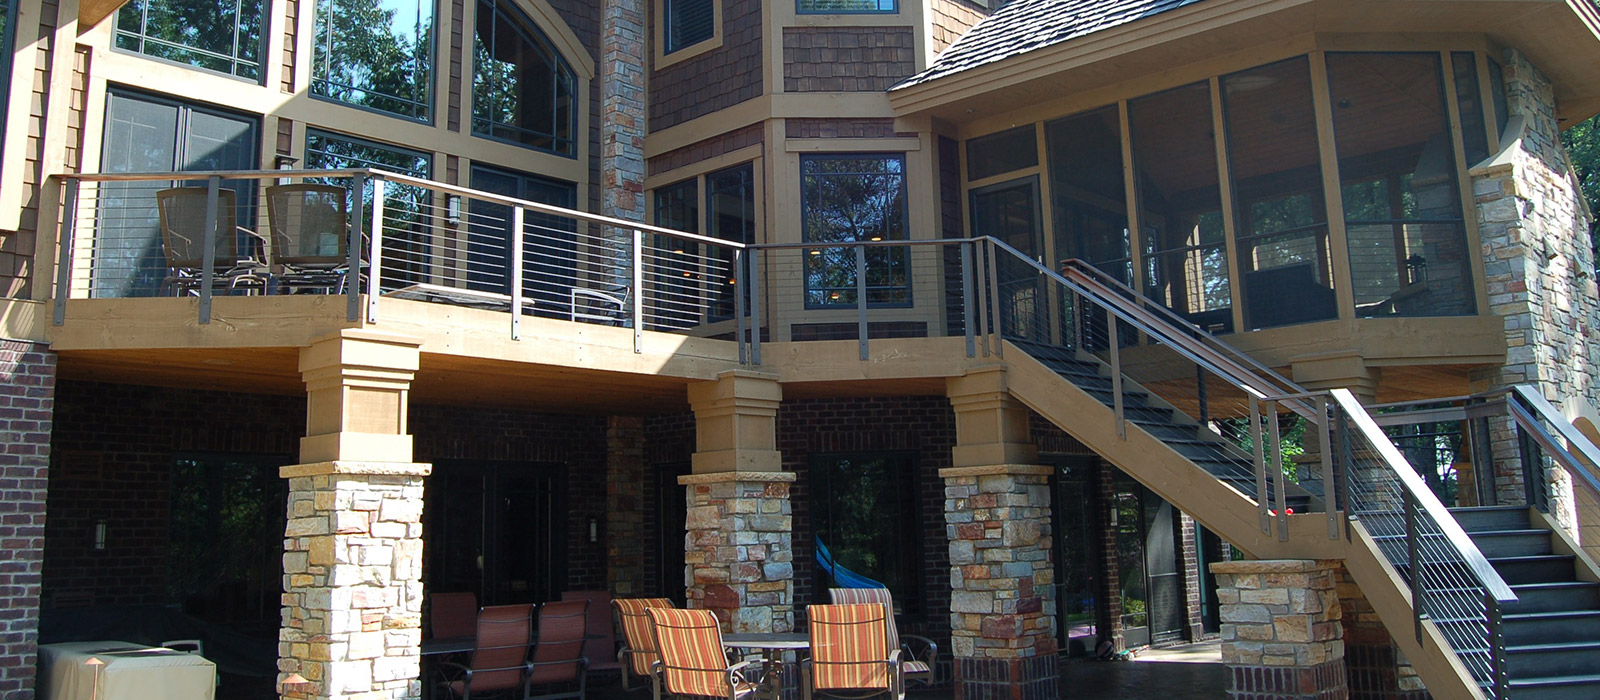 Screened-in Porch Leading to Large Decked. The Deck Covers a Dining & Seating area